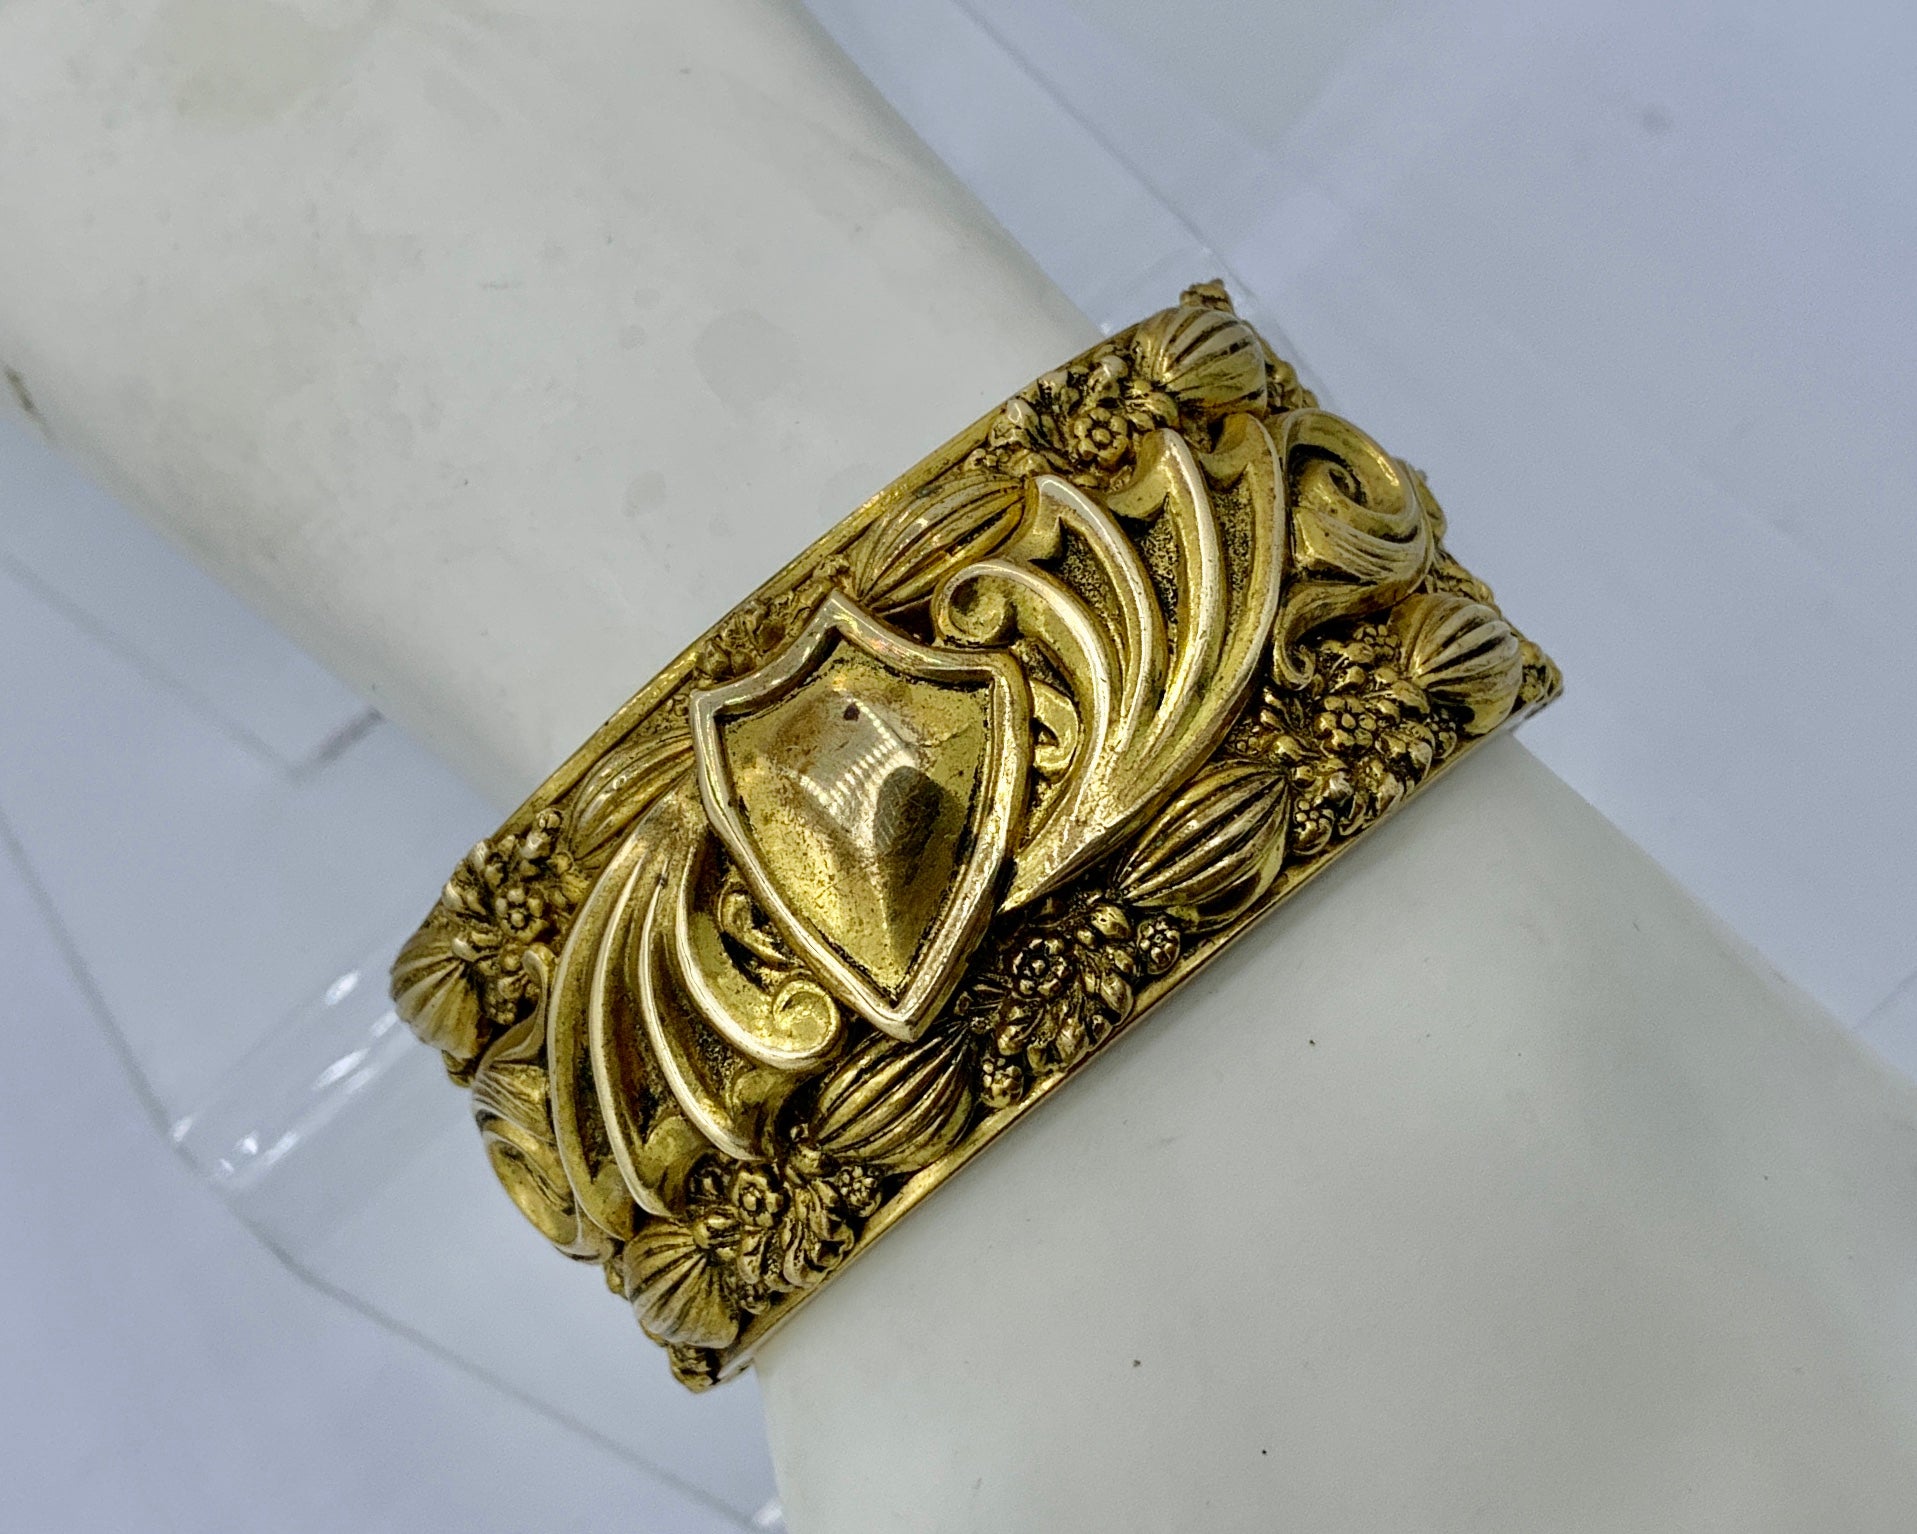 THIS IS A WONDERFUL ANTIQUE VICTORIAN - ART NOUVEAU BANGLE BRACELET IN A STUNNING HEAVY REPOUSSE THREE DIMENSIONAL DESIGN WITH A SHIELD, SCROLLS AND FLOWERS AND LEAVES OF EXQUISITE BEAUTY.  THE BRACELET IS GOLD FILLED AND SUCH A STUNNING EXAMPLE OF